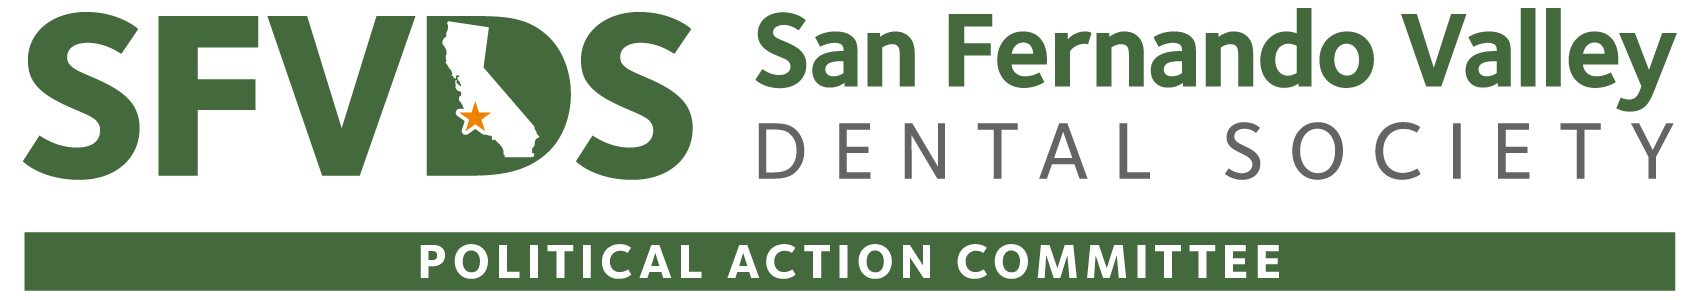 SFVDS Political Action Committee